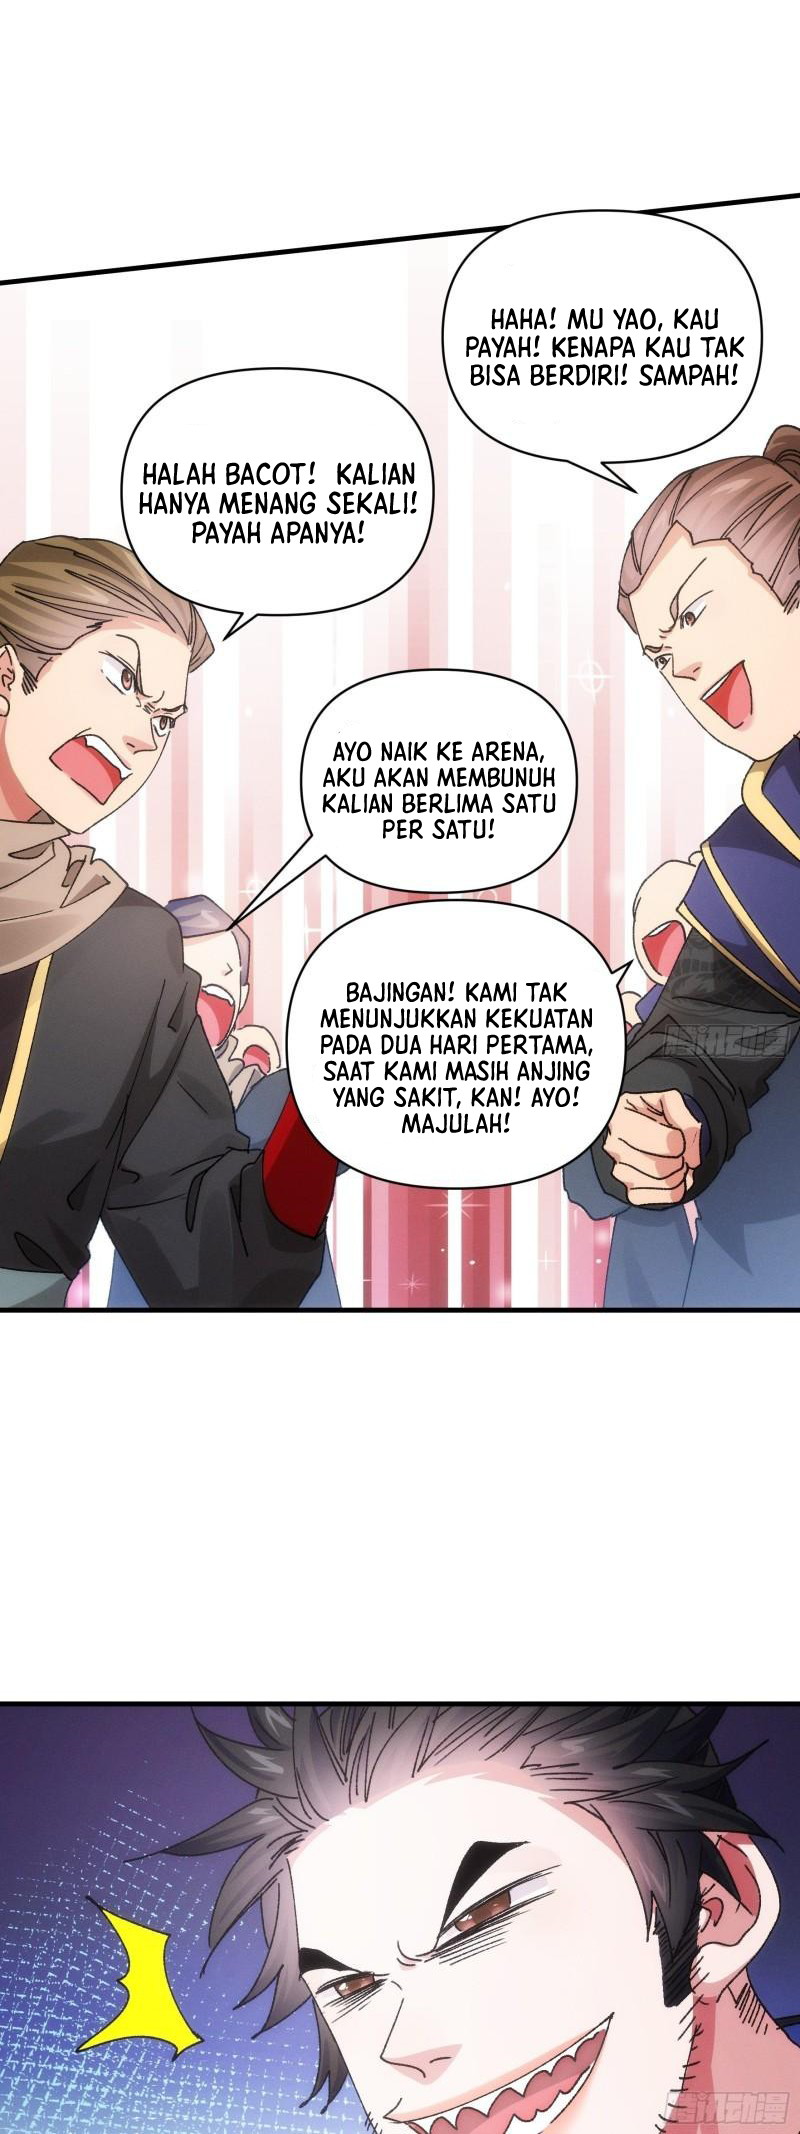 Dilarang COPAS - situs resmi www.mangacanblog.com - Komik i just dont play the card according to the routine 083 - chapter 83 84 Indonesia i just dont play the card according to the routine 083 - chapter 83 Terbaru 9|Baca Manga Komik Indonesia|Mangacan